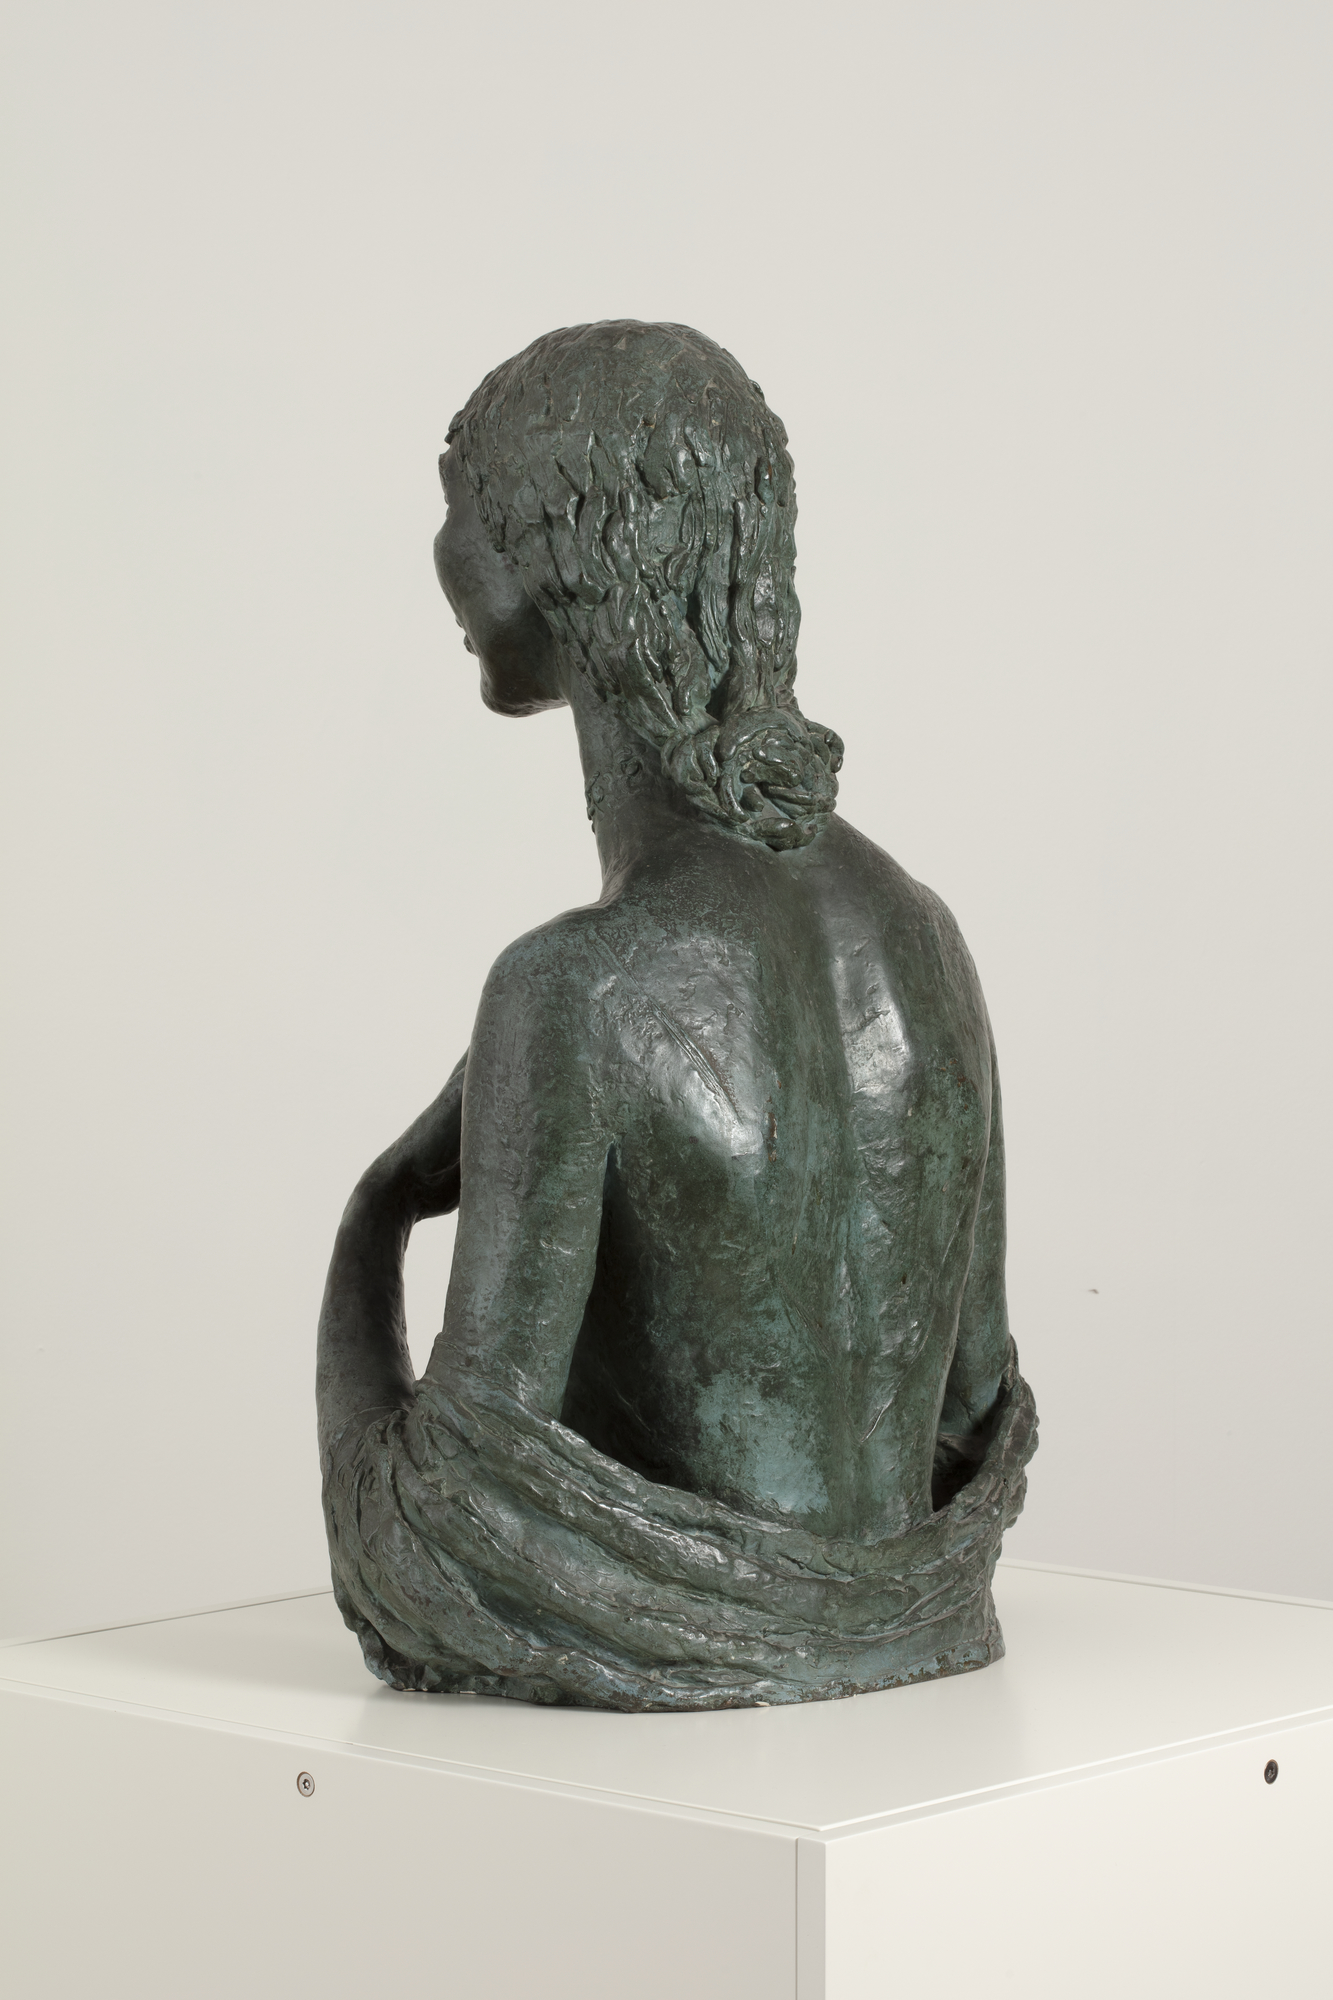 A rear view of a bronze sculpture of a naked woman shown from the waist up, showing an elaborate knotted hair style.